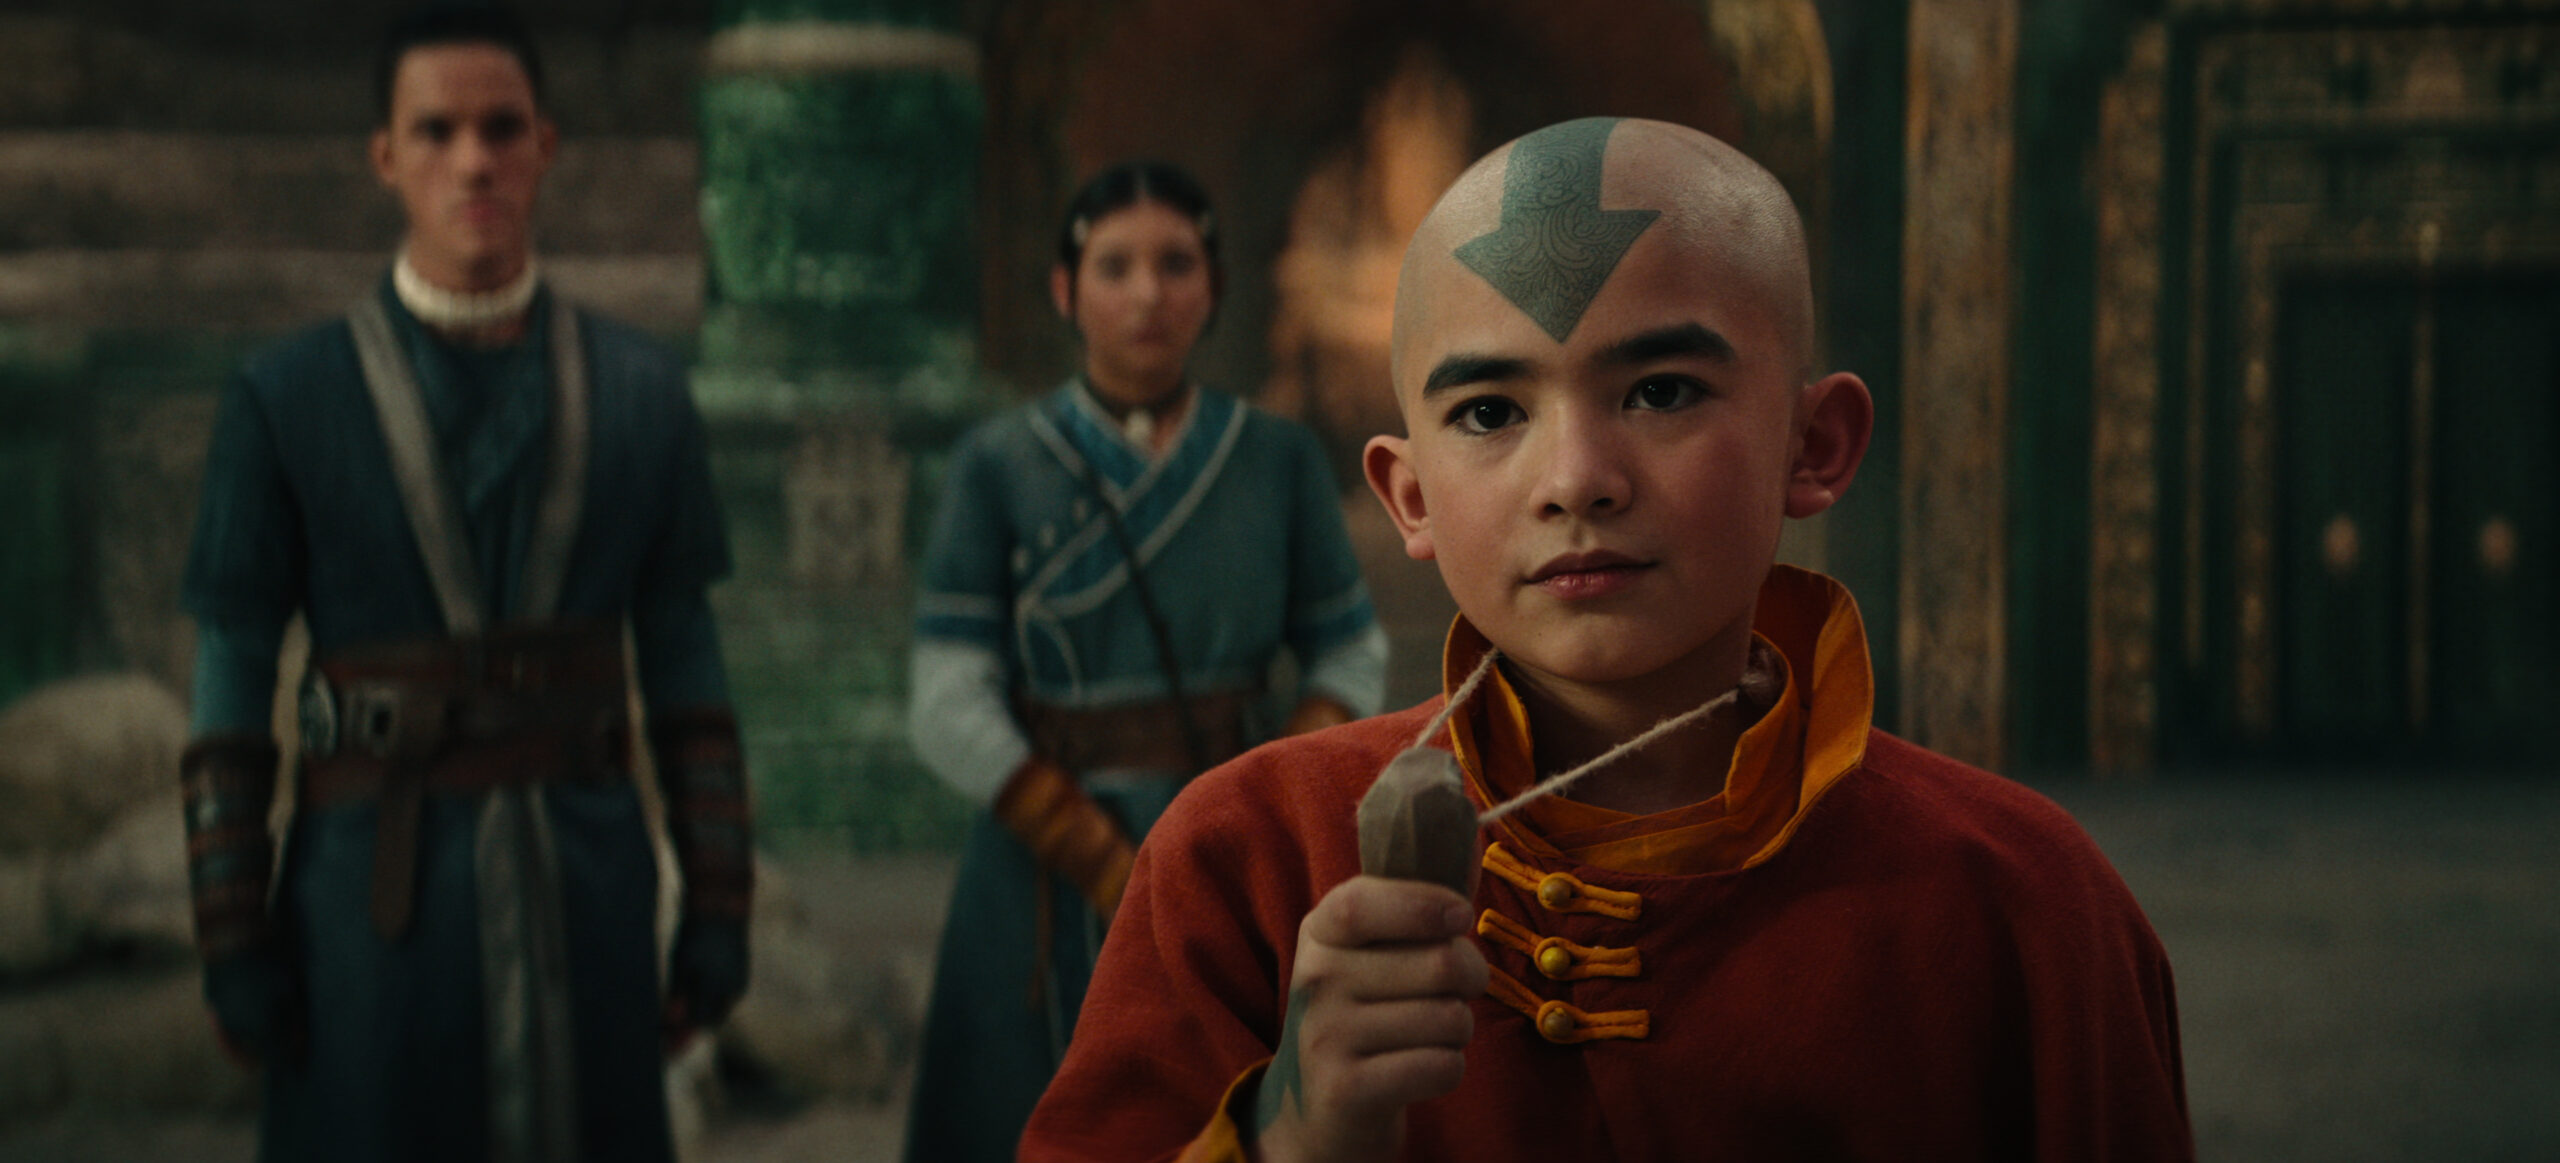 Netflix Renews 'Avatar: The Last Airbender' For Seasons 2 And 3, Will End With Third Season